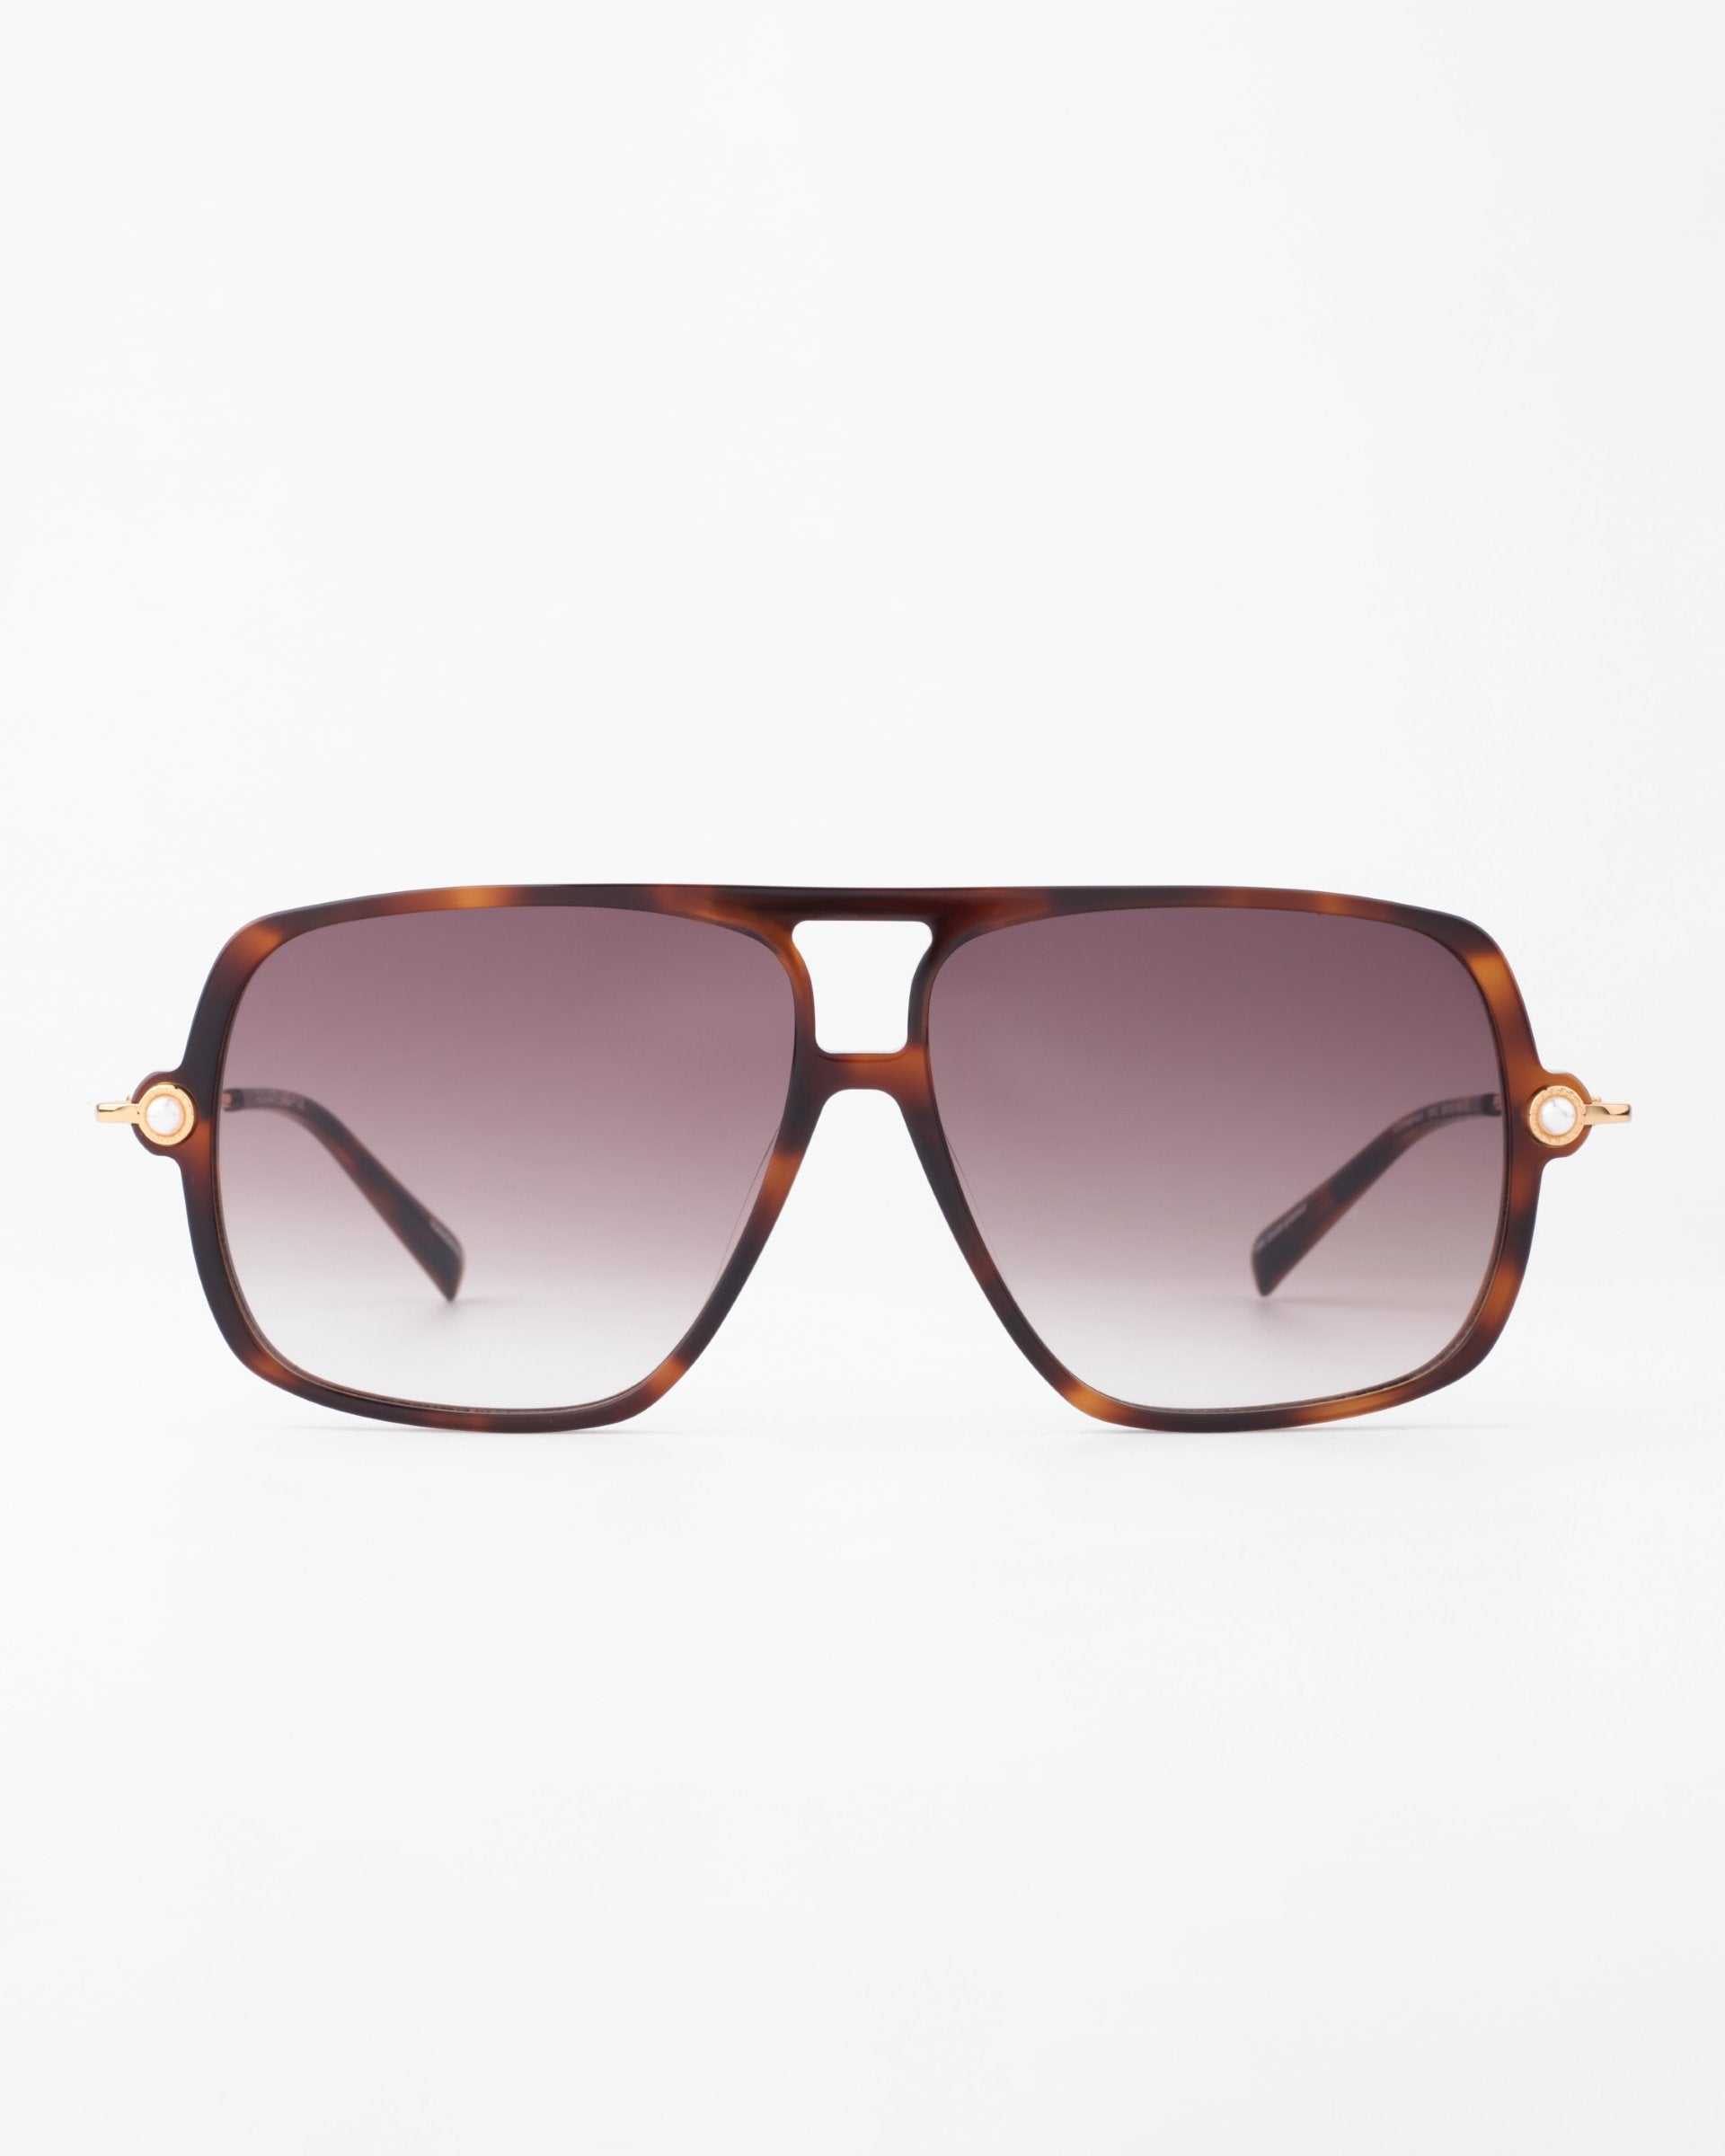 The Cinnamon by For Art&#39;s Sake® is a pair of square-shaped sunglasses with a prominent browline and thick tortoiseshell frames, featuring gradient lenses that darken from light at the bottom to darker at the top. The arms taper towards the ear and showcase small metal accents with faux pearl embellishment.